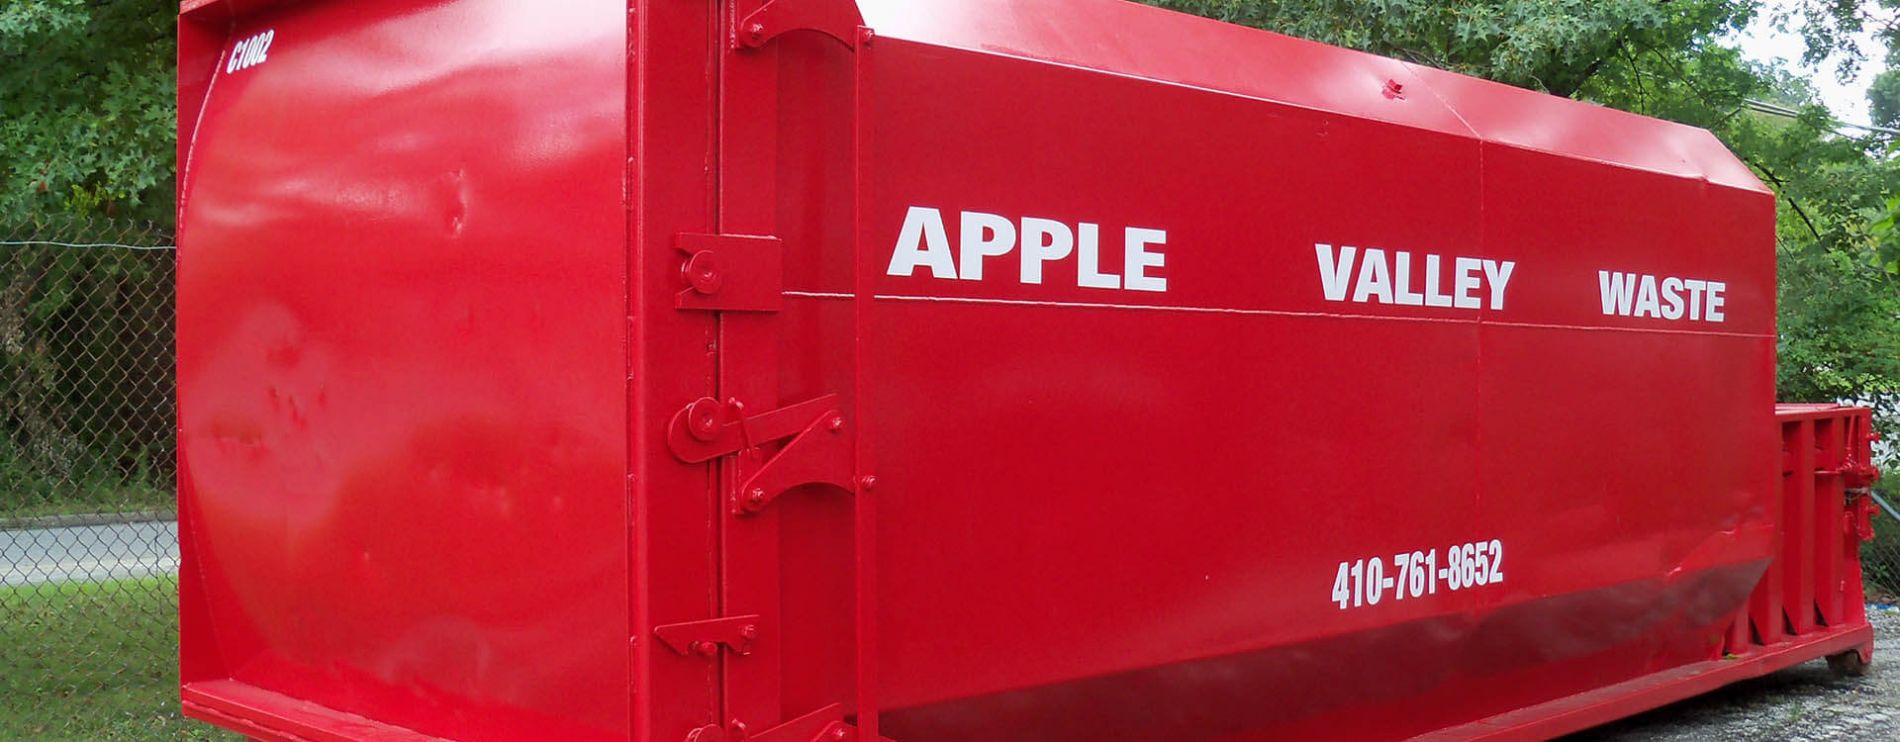 Apple Valley Waste compactor photo.